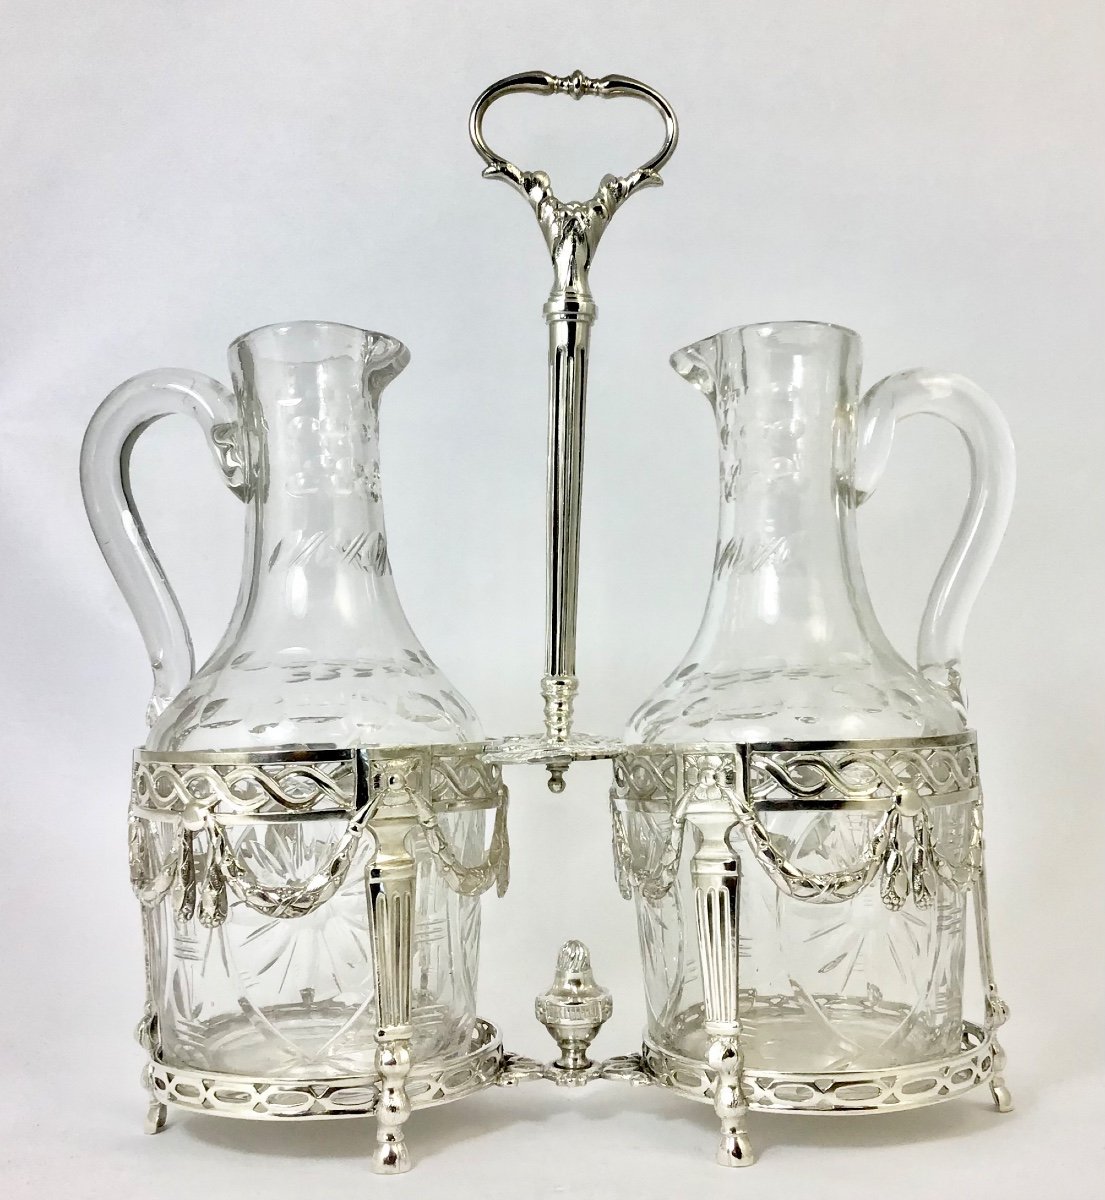 Oil And Vinegar Cruet Ghent 1788, Sterling Silver, Goldsmith Bourgeois